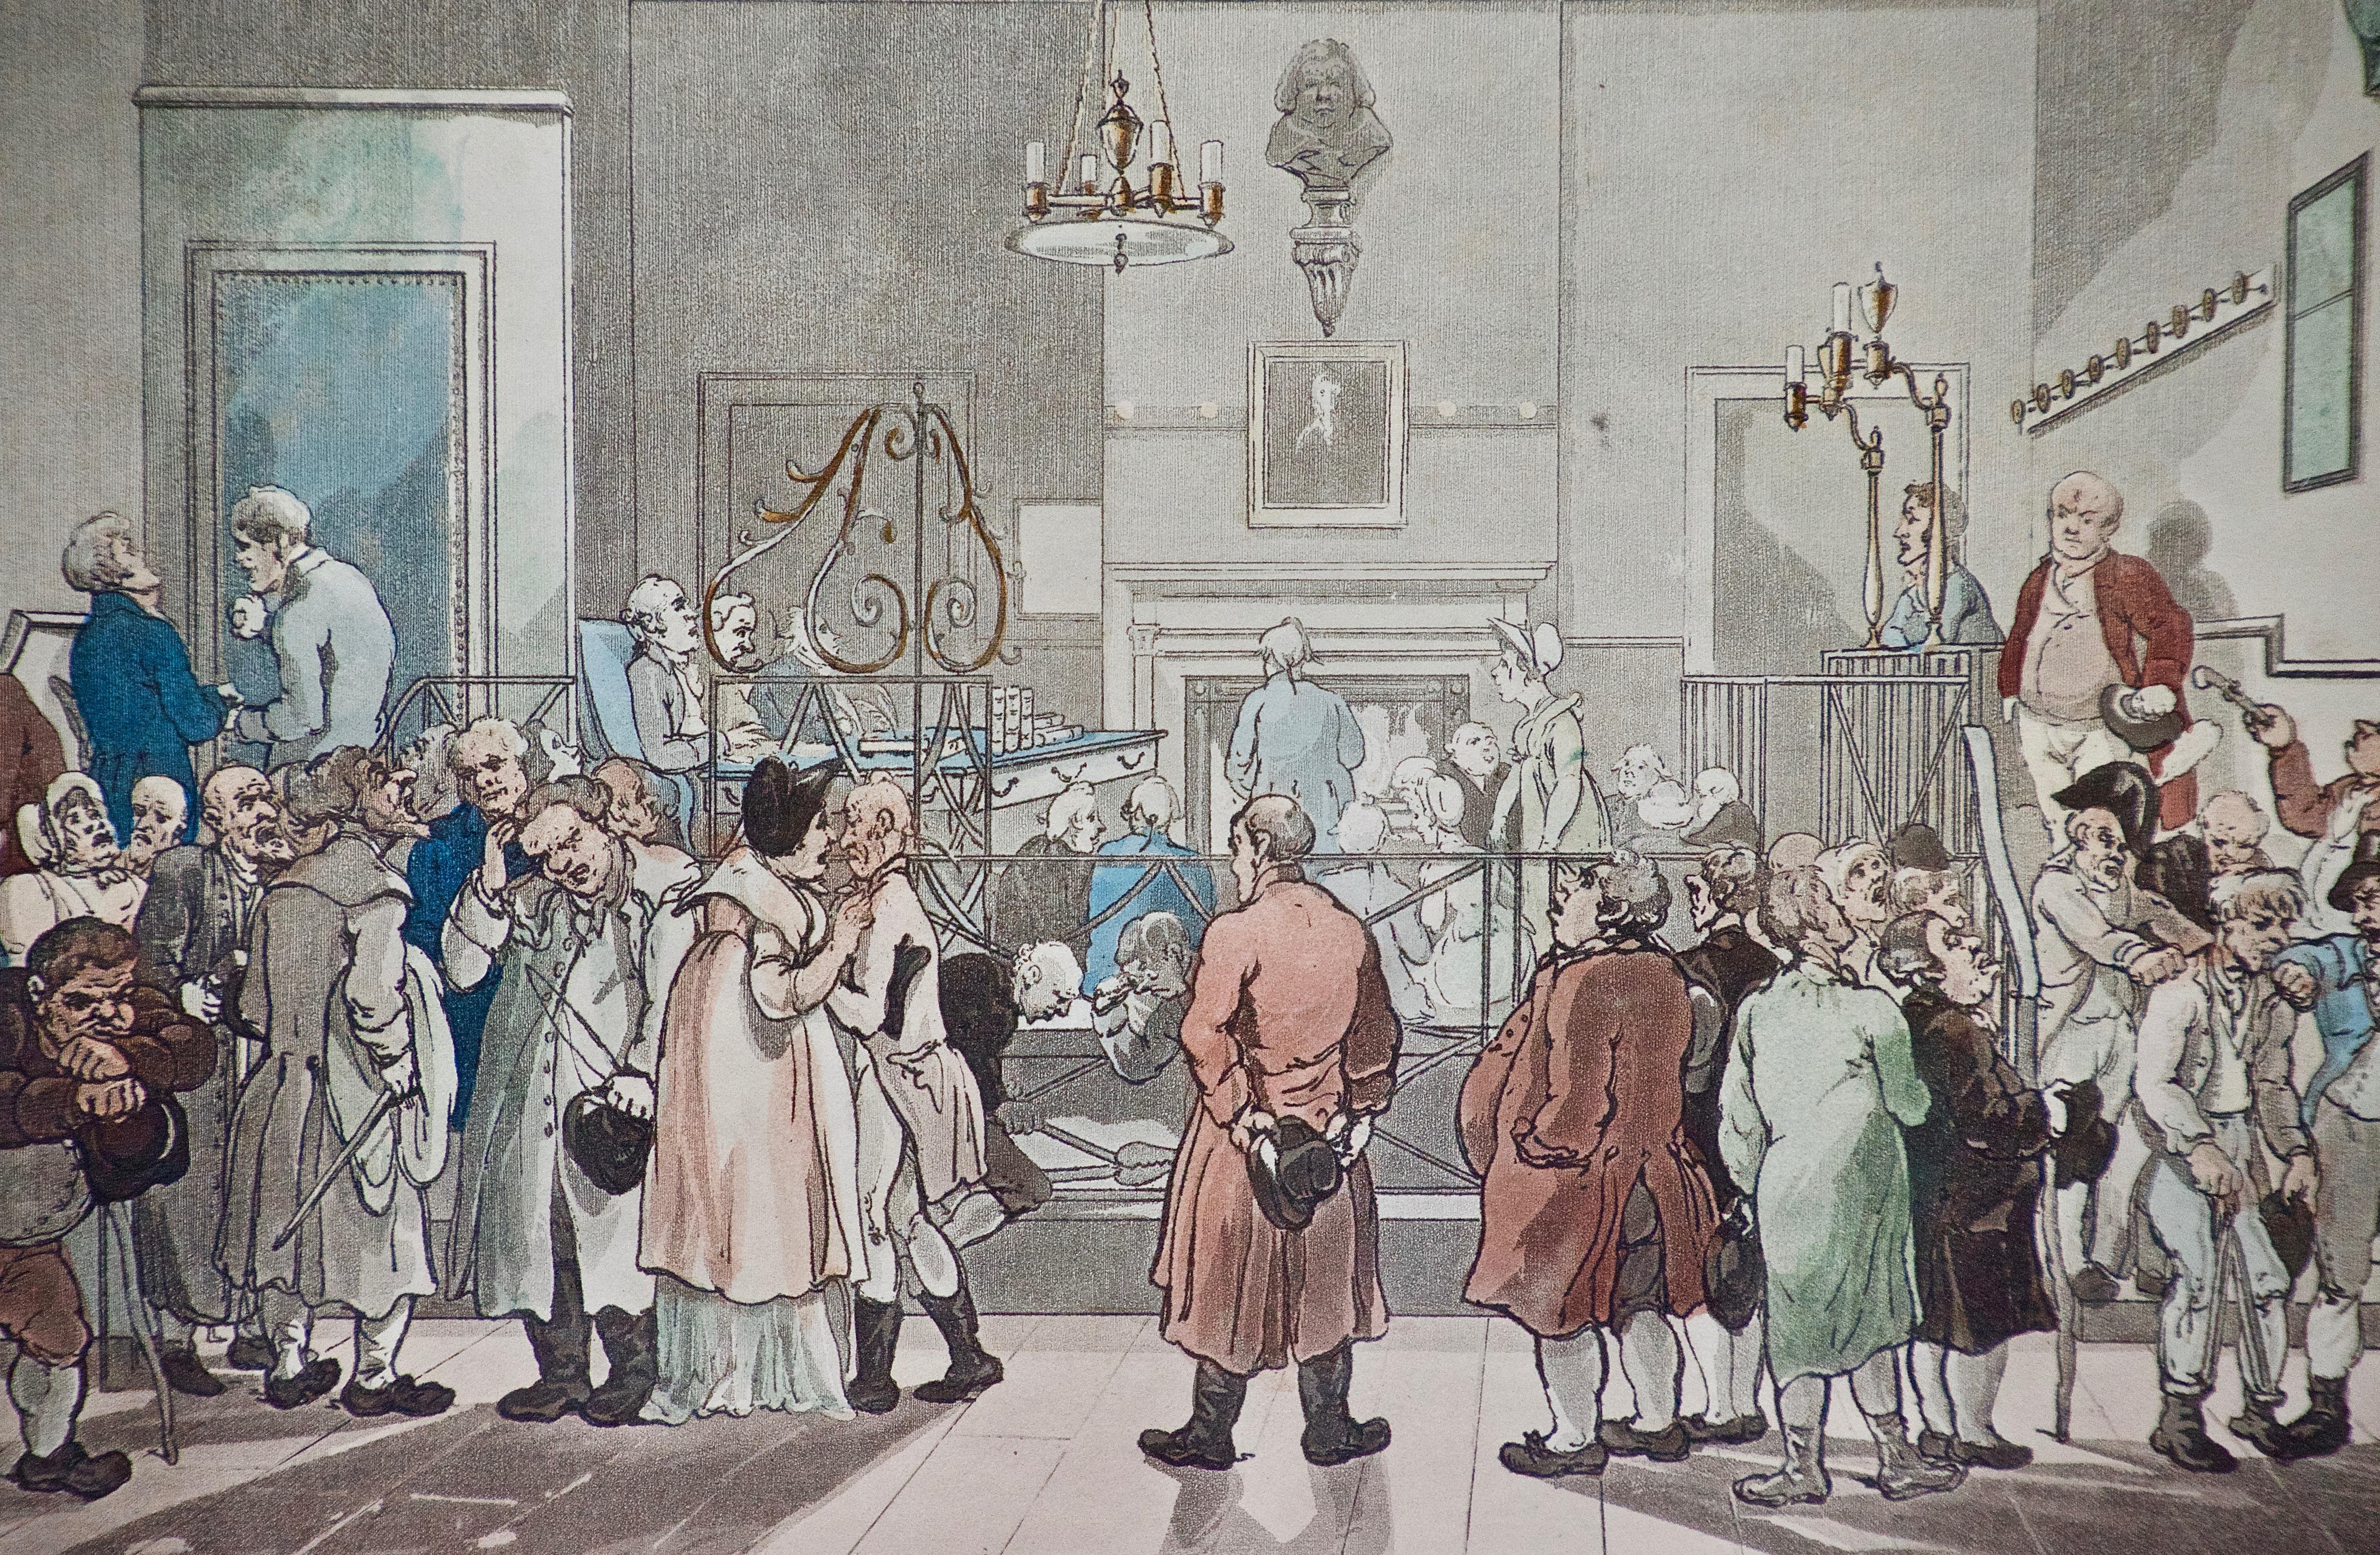 Bow Street Office: Rowlandson Hand-colored Engraving from Microcosm of London  - Print by Thomas Rowlandson